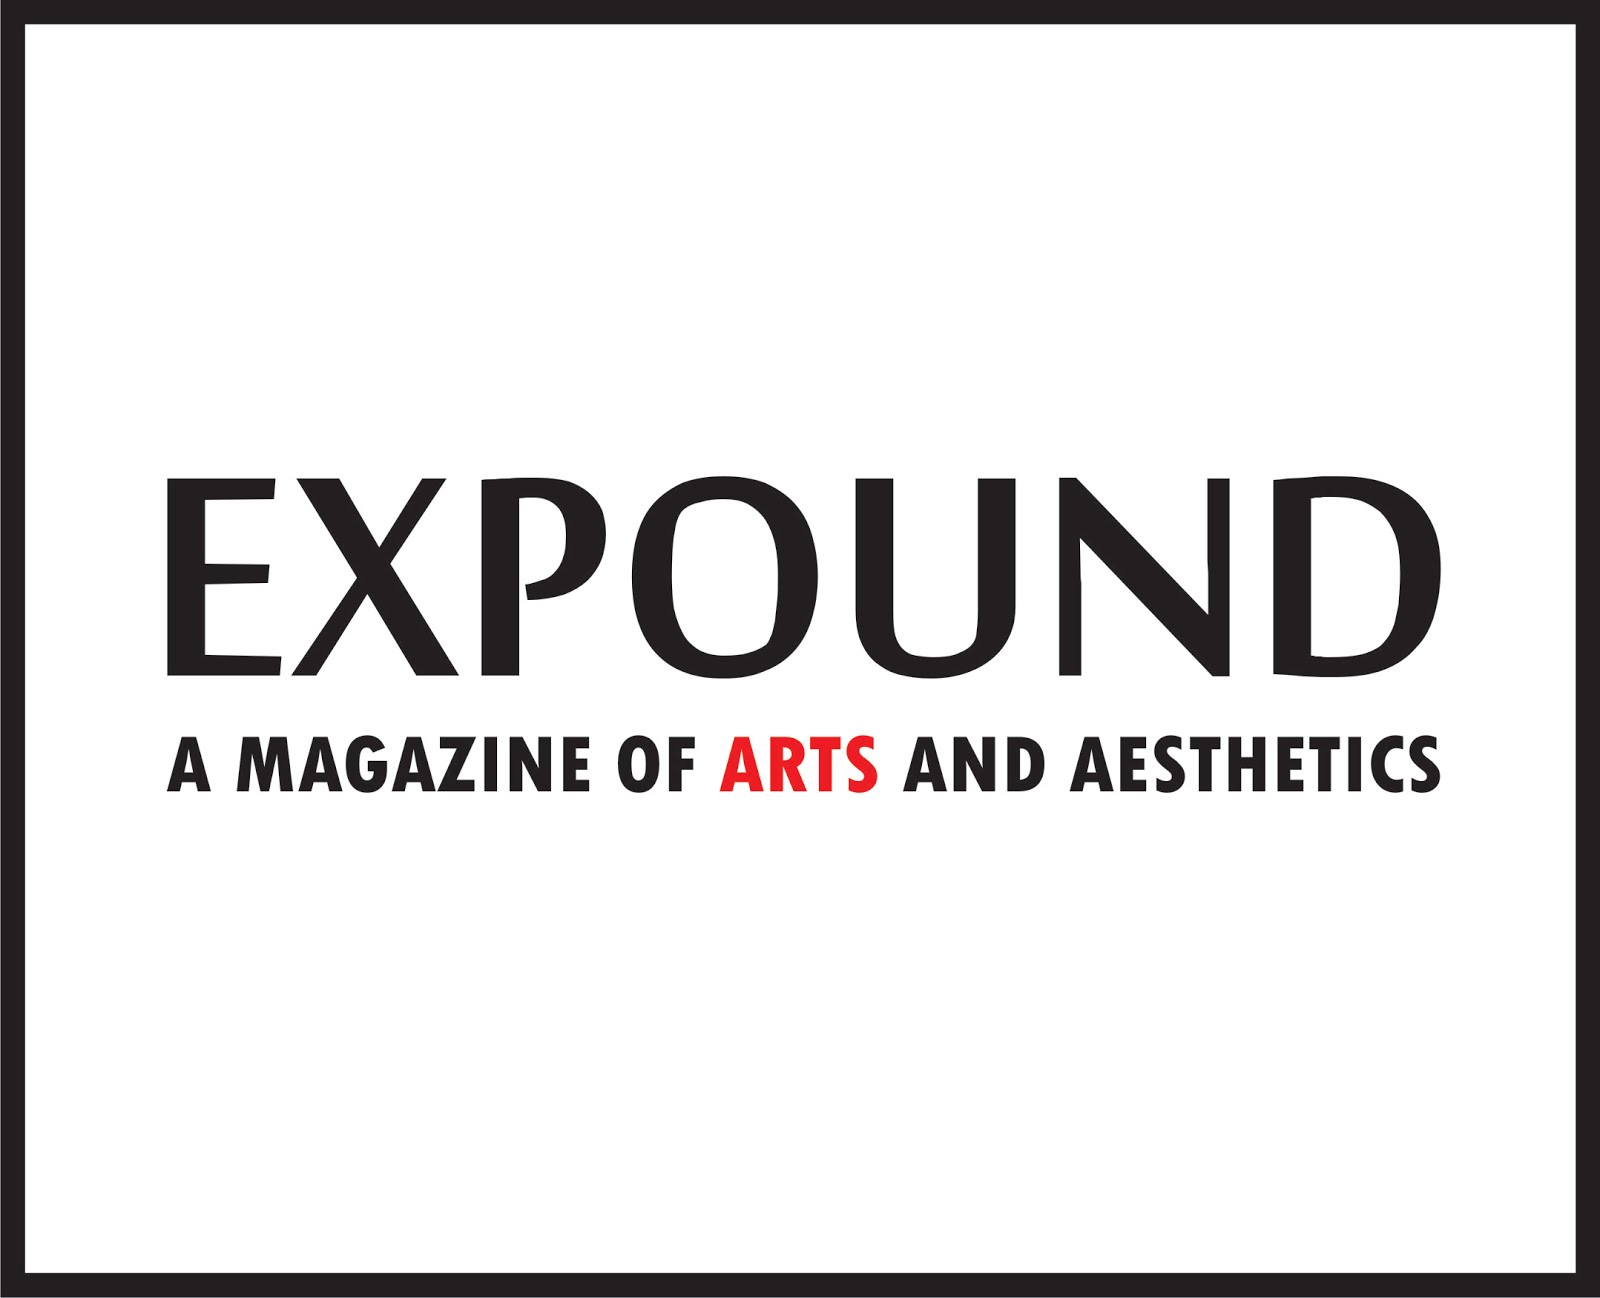 EXPOUND